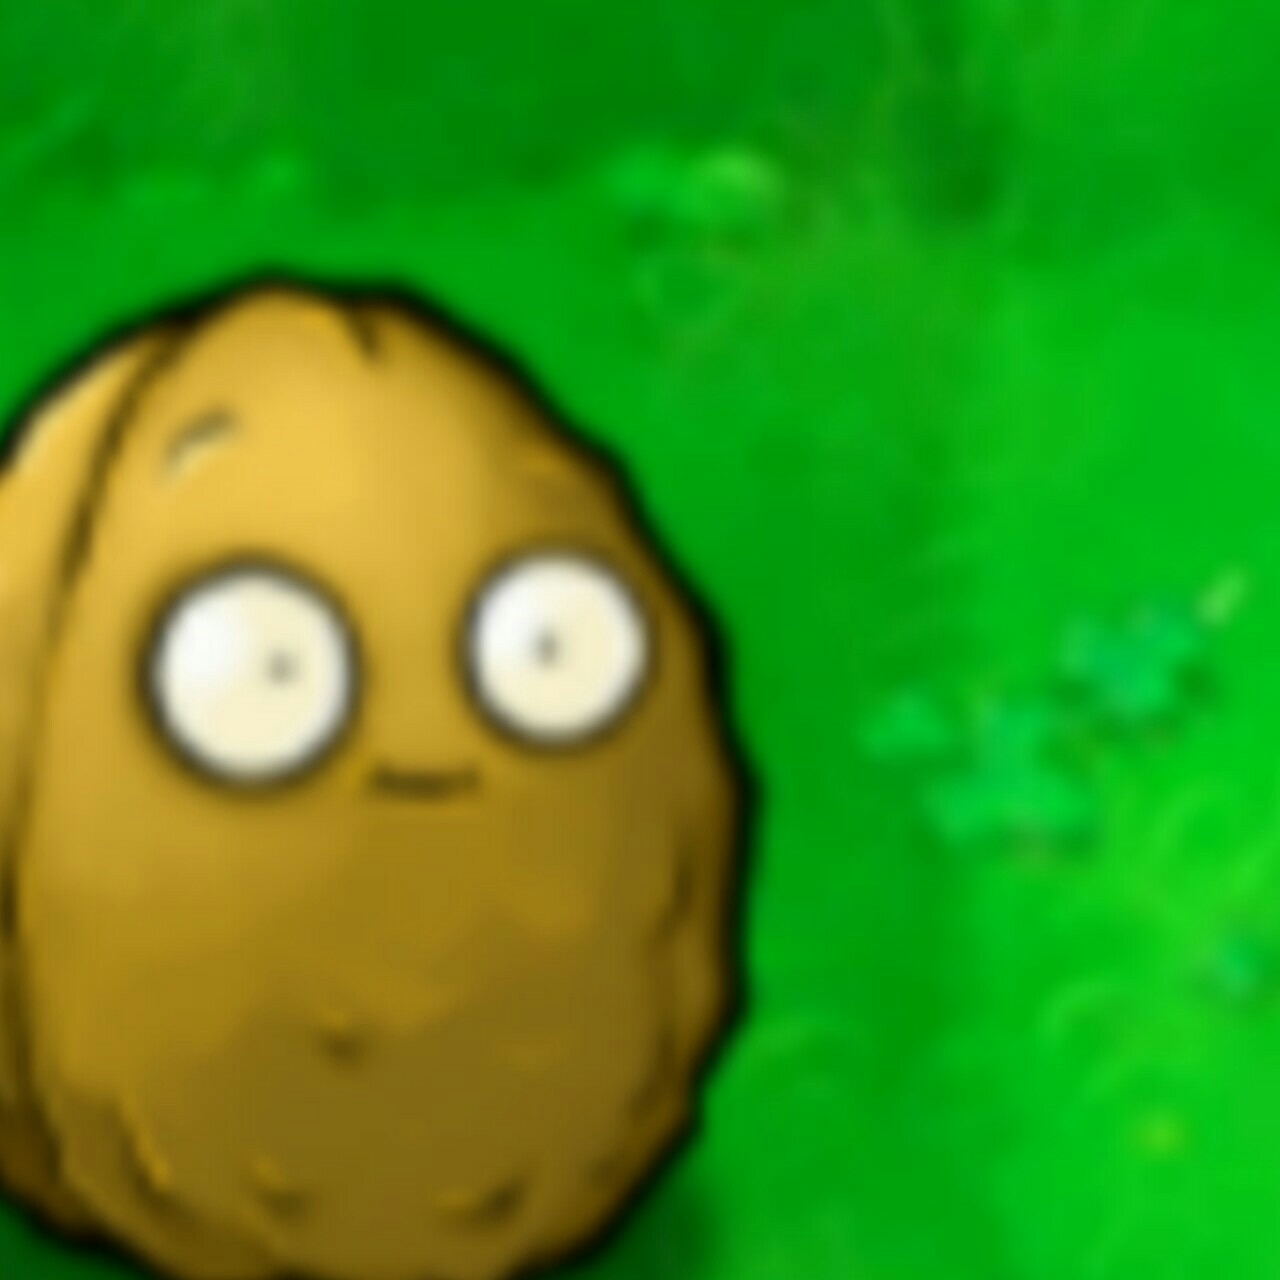 Luck - Plants vs Zombies, CPID, Games, Longpost, Computer games